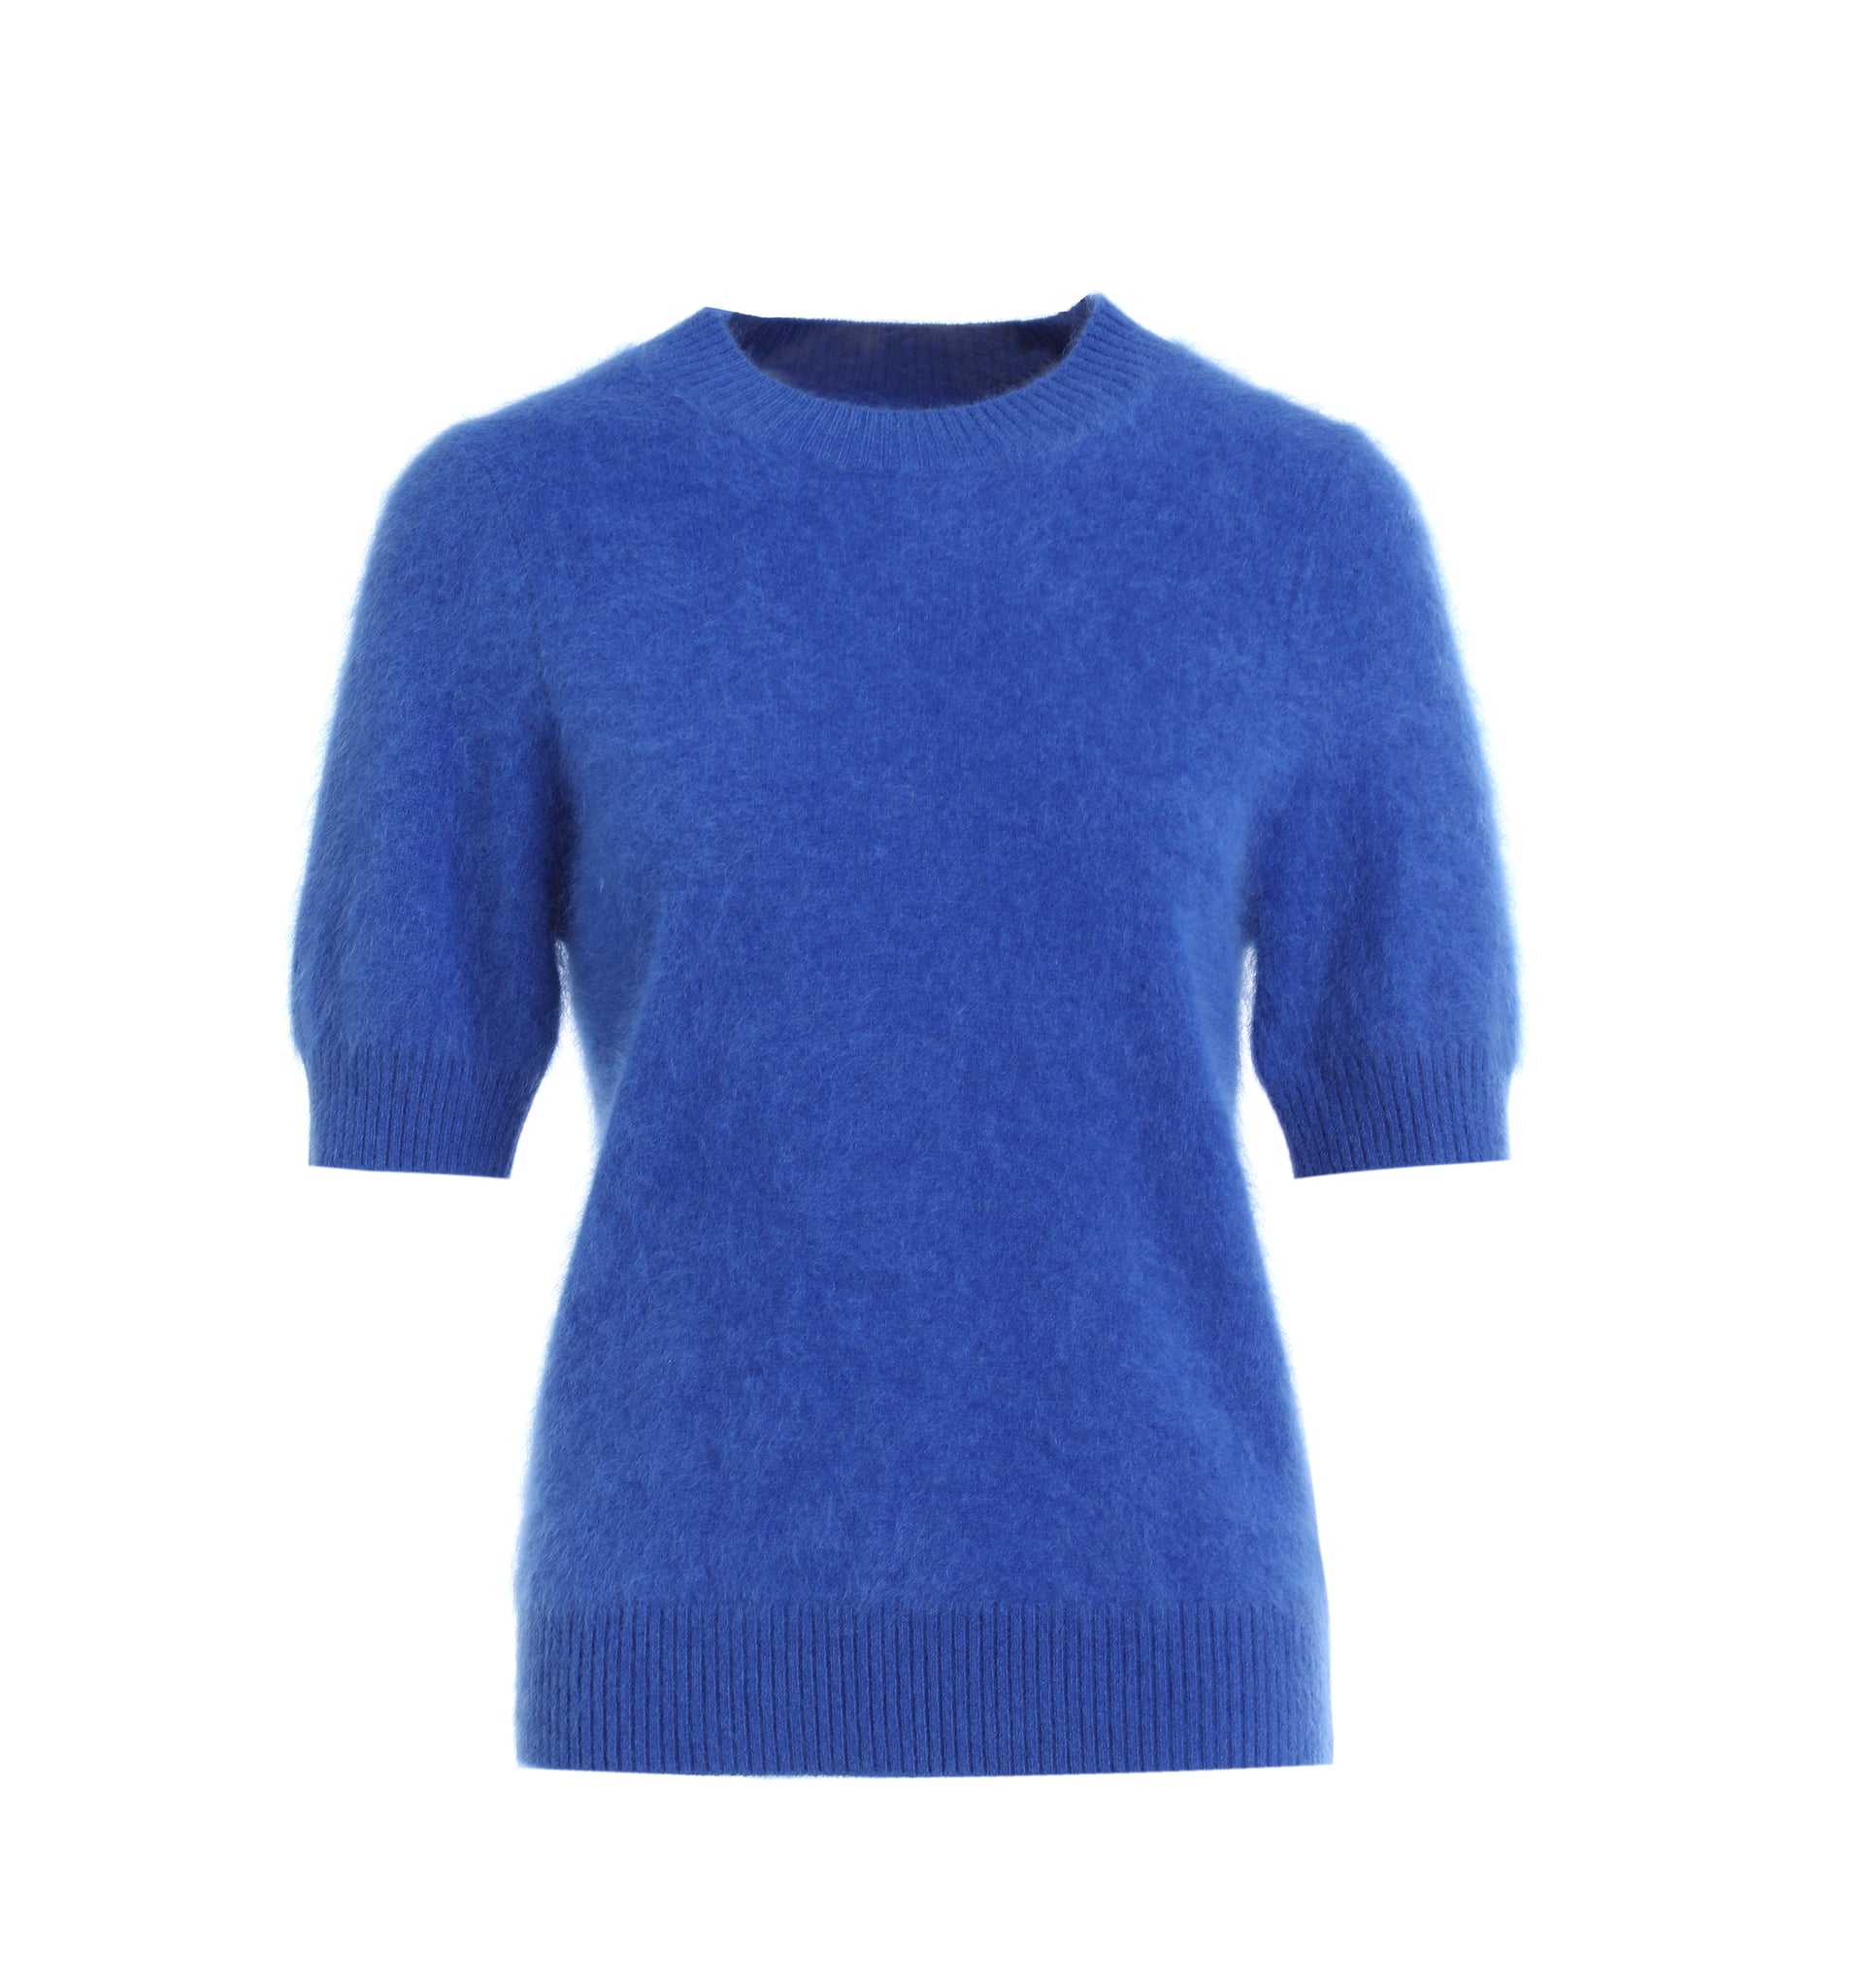 Cashmere | Brushed Sweater | Women Brushed Sweater | Bellemere New York